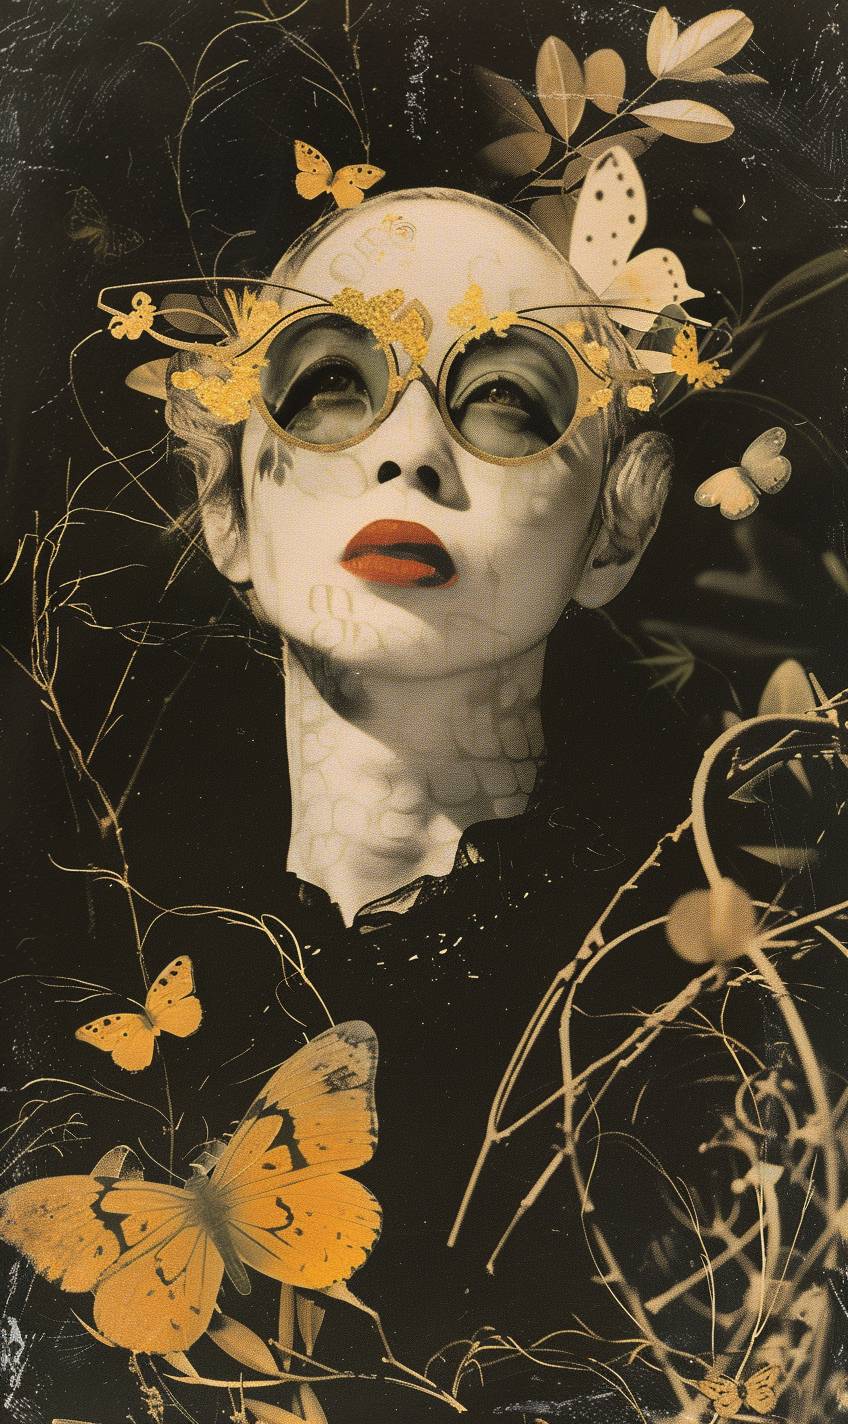 Anime character by Satoshi Kon as depicted by Claude Cahun